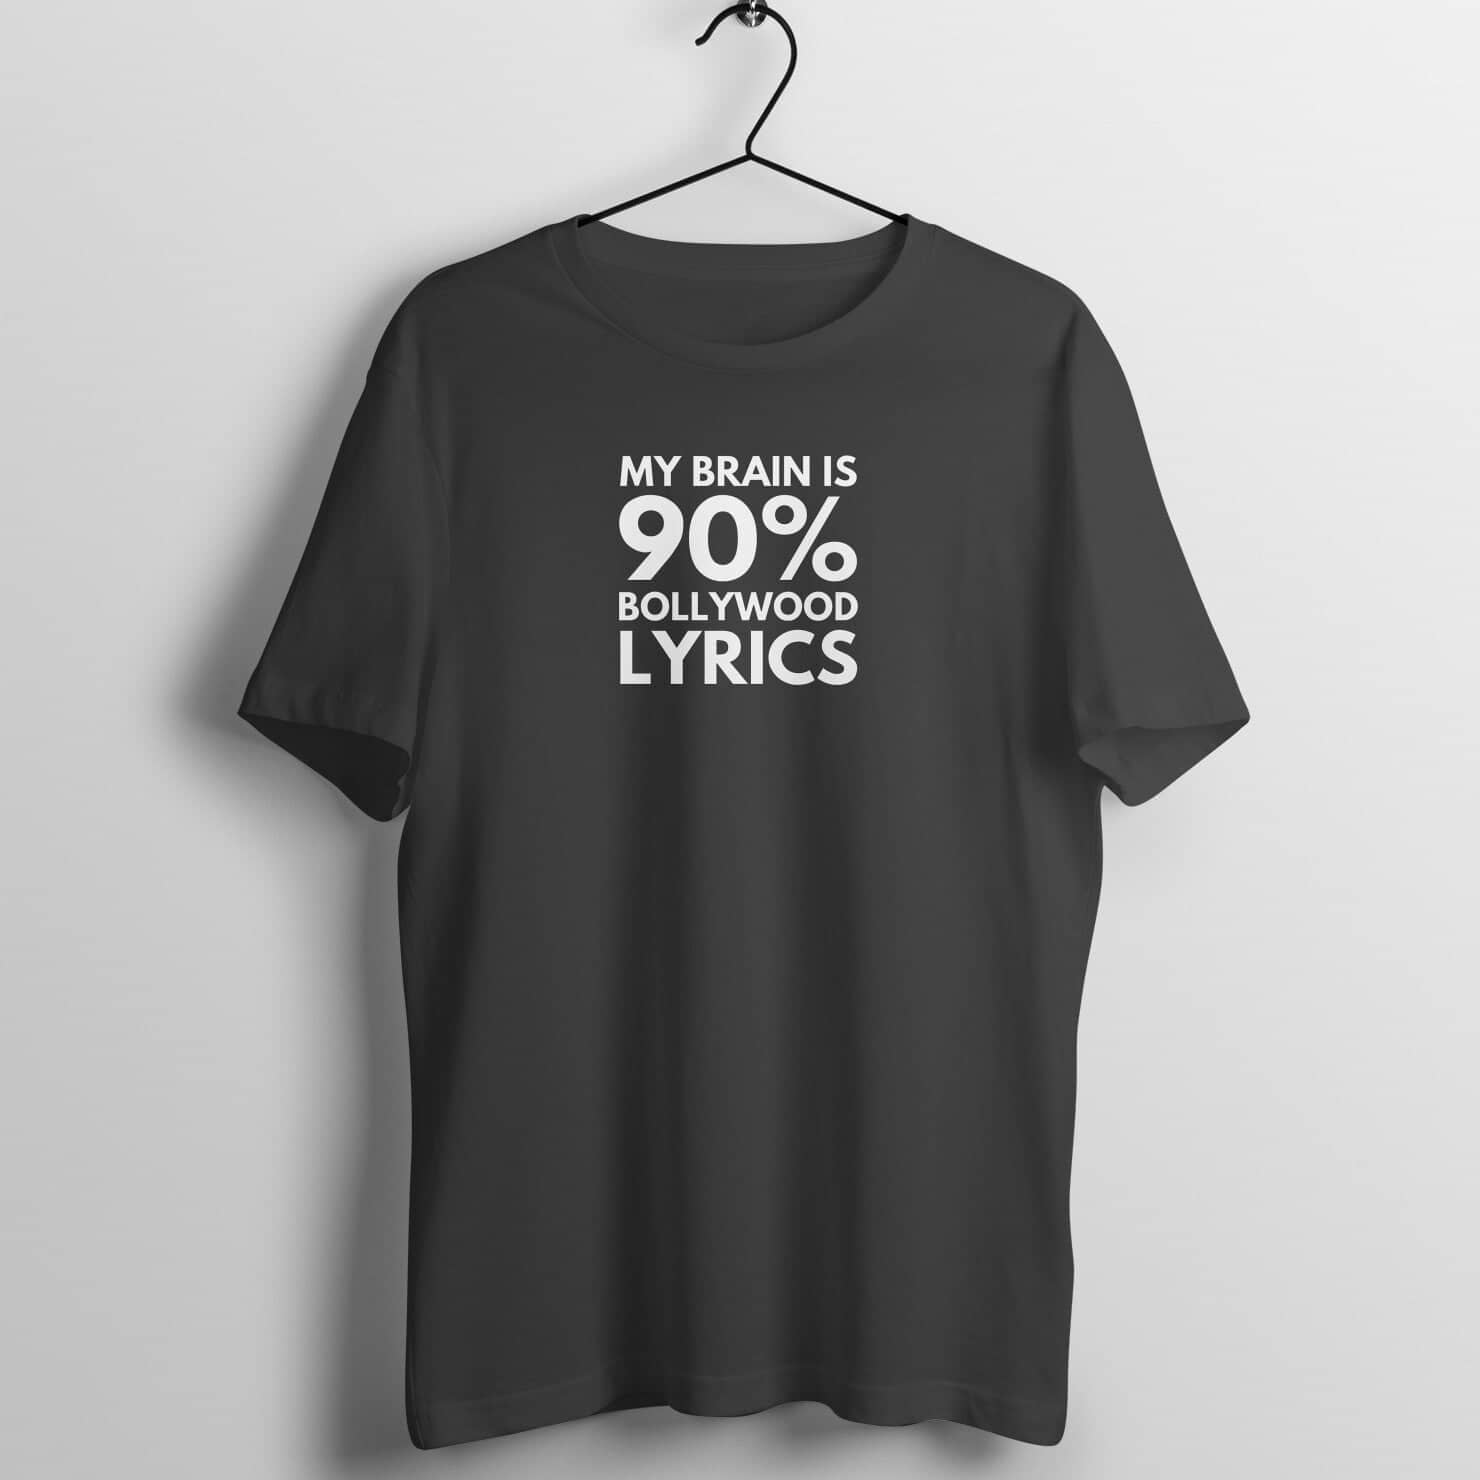 My Brain is 90% Bollywood Lyrics Exclusive Black T Shirt for Men and Women freeshipping - Catch My Drift India